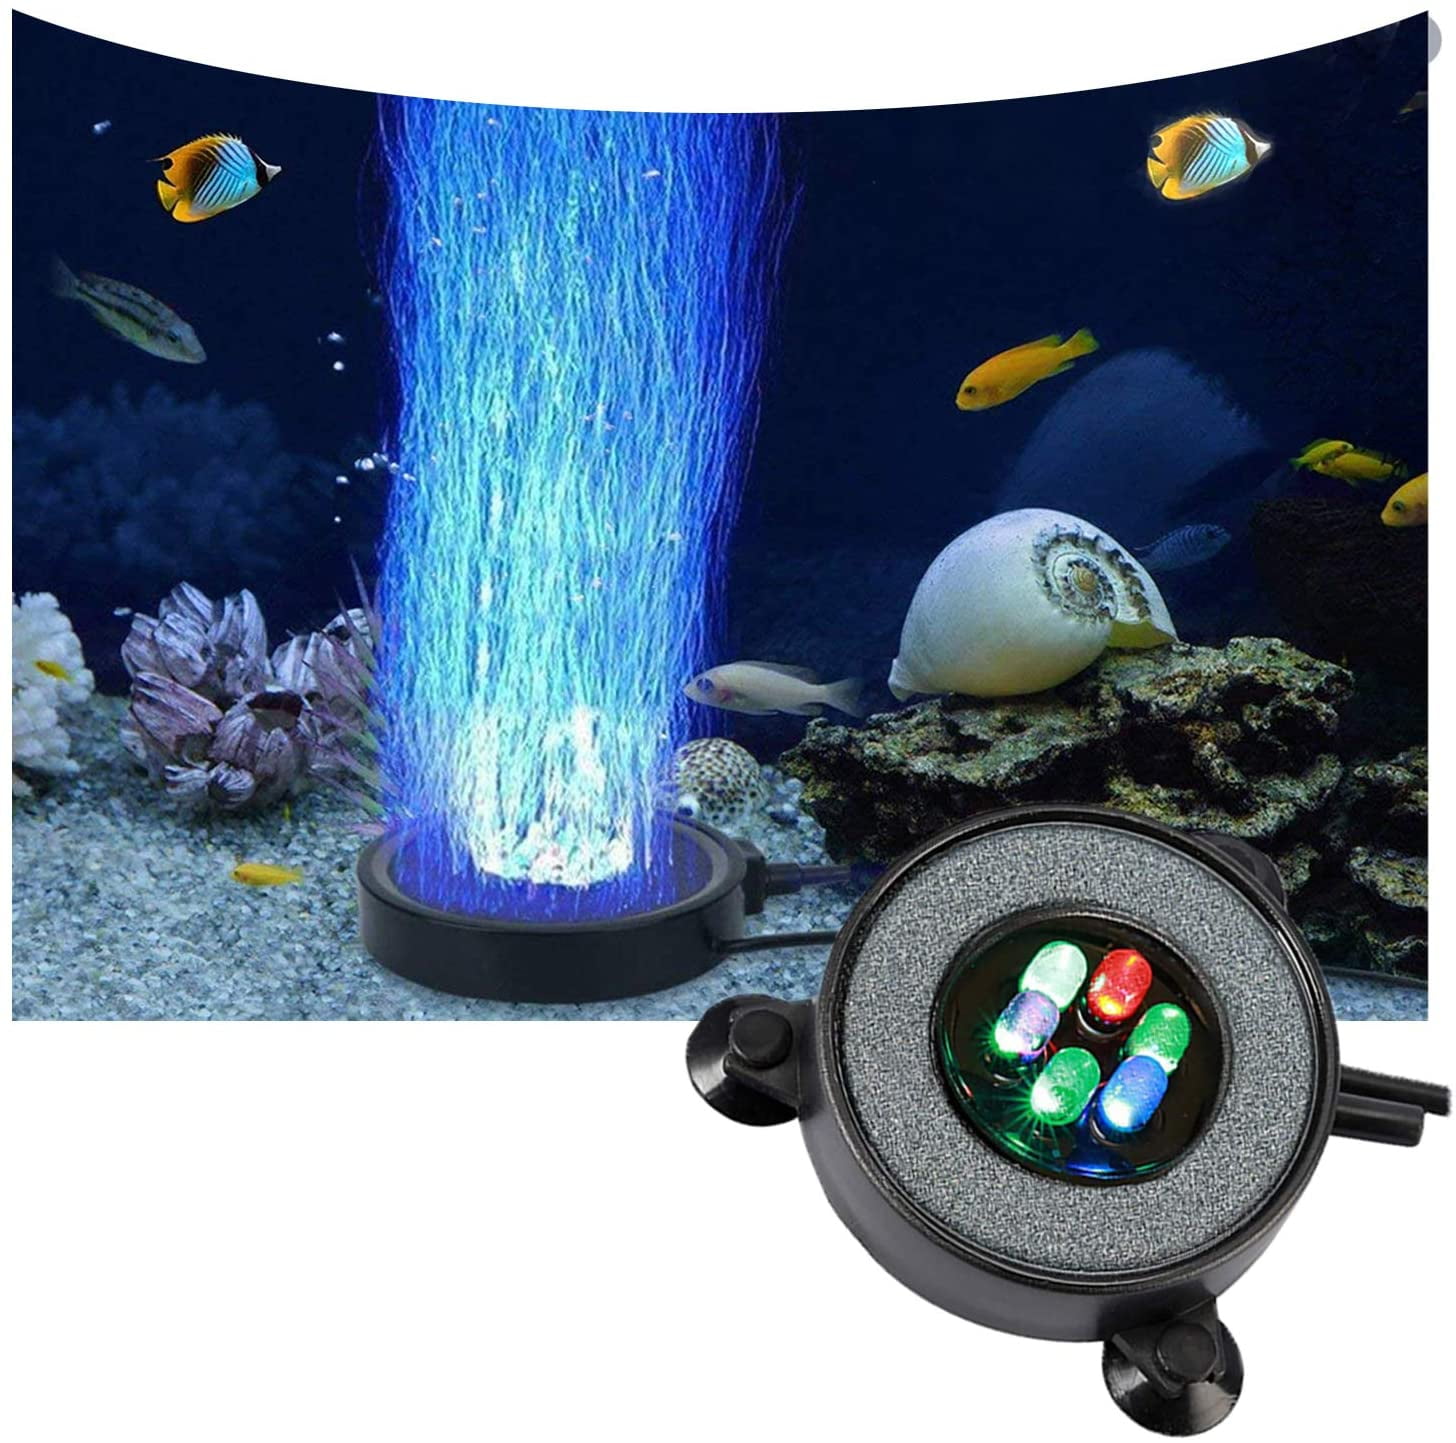 12V 18.9inch Waterproof Fish Tank Light with Timer Auto On and Off White and Blue LED Light Bar Strick for Fish Tank Number-one LED Aquarium Light Adjustable 3 Mode Lights 